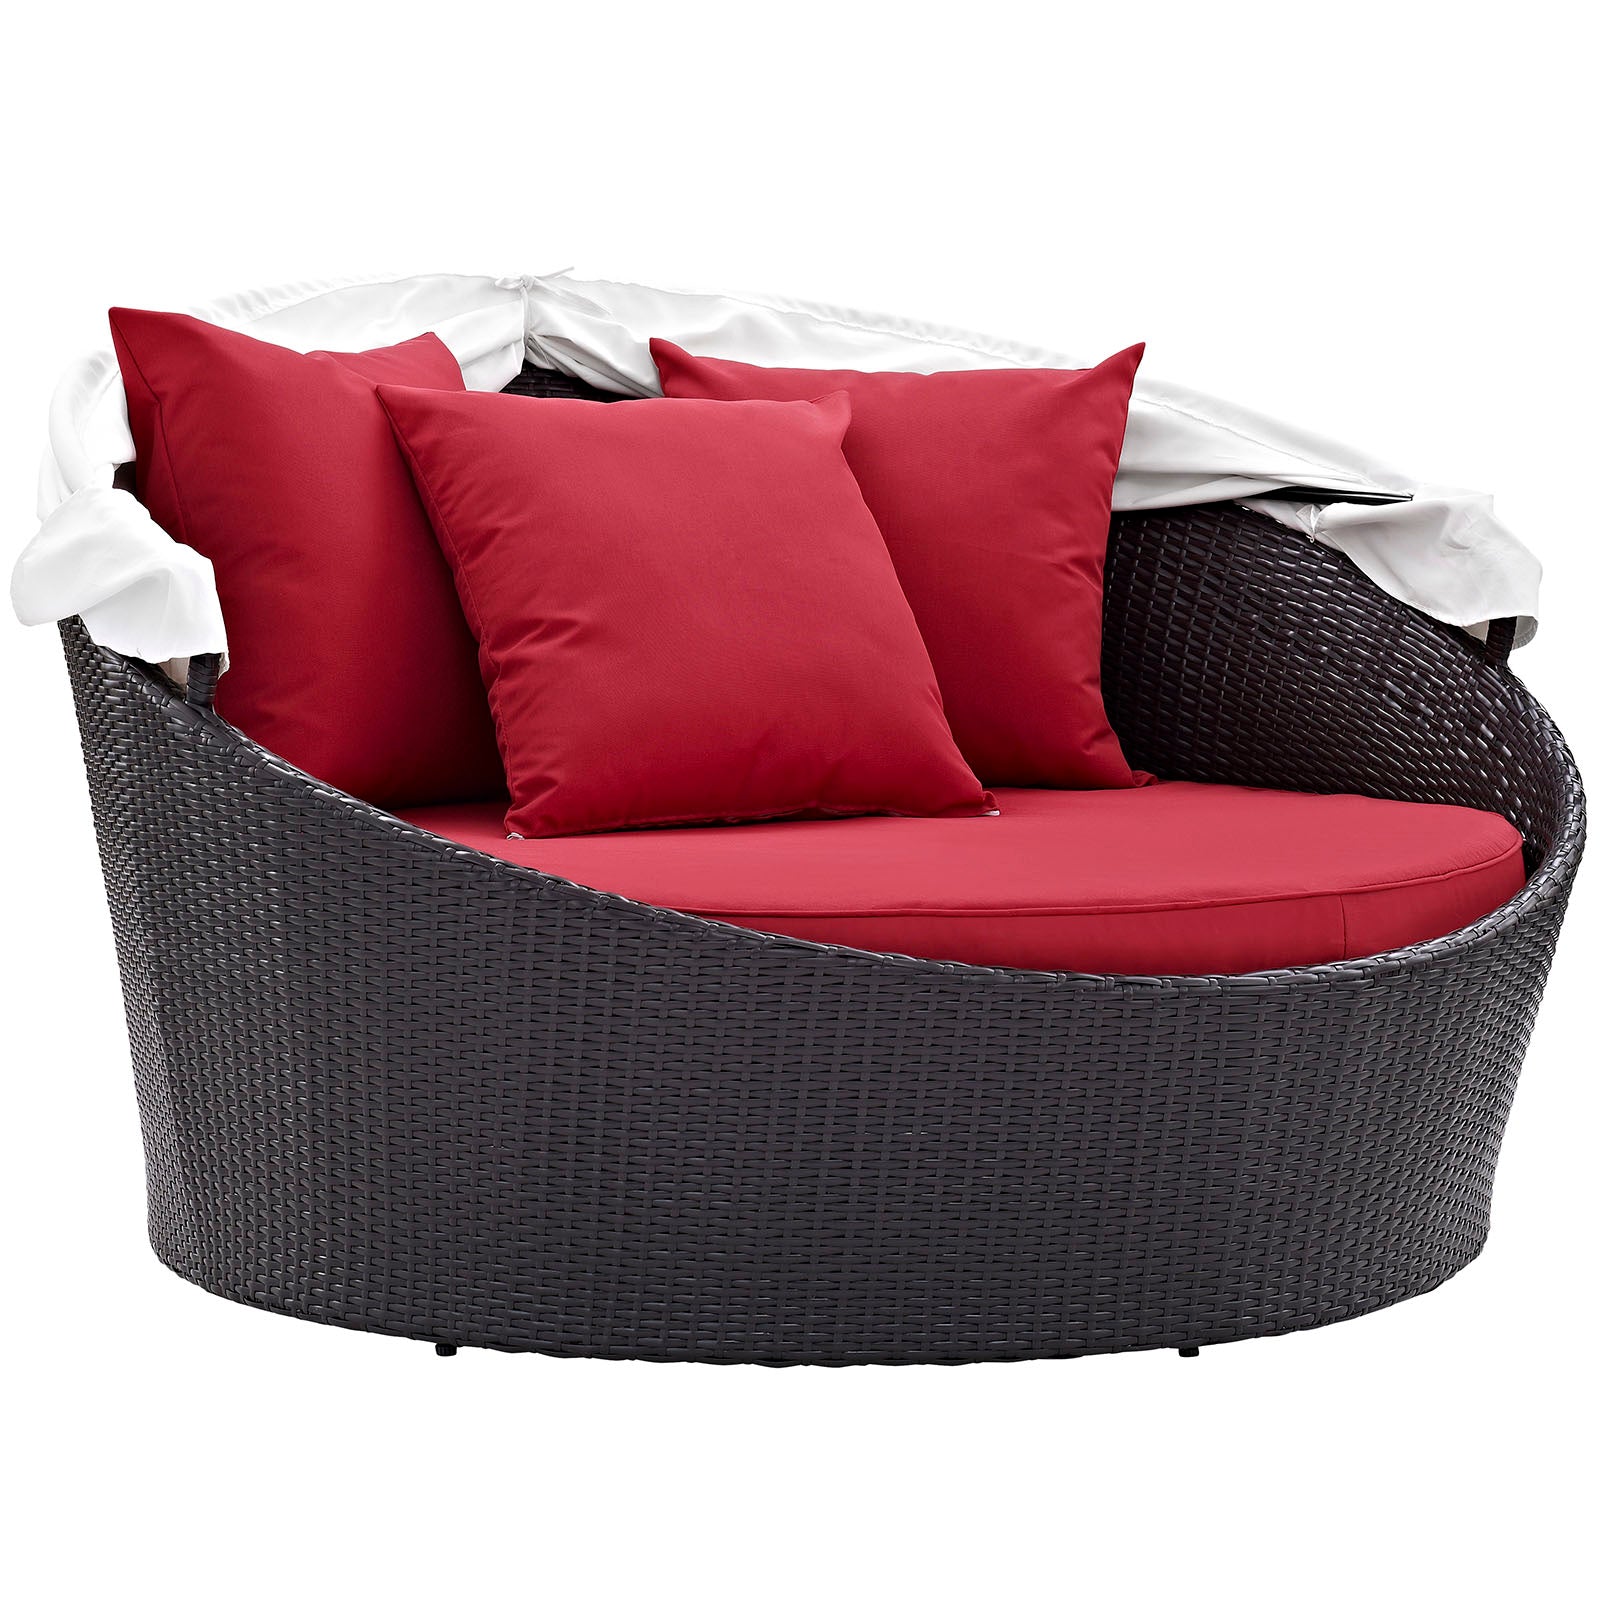 Modway Patio Daybeds - Convene Canopy Outdoor Patio 63"W Daybed Espresso Red